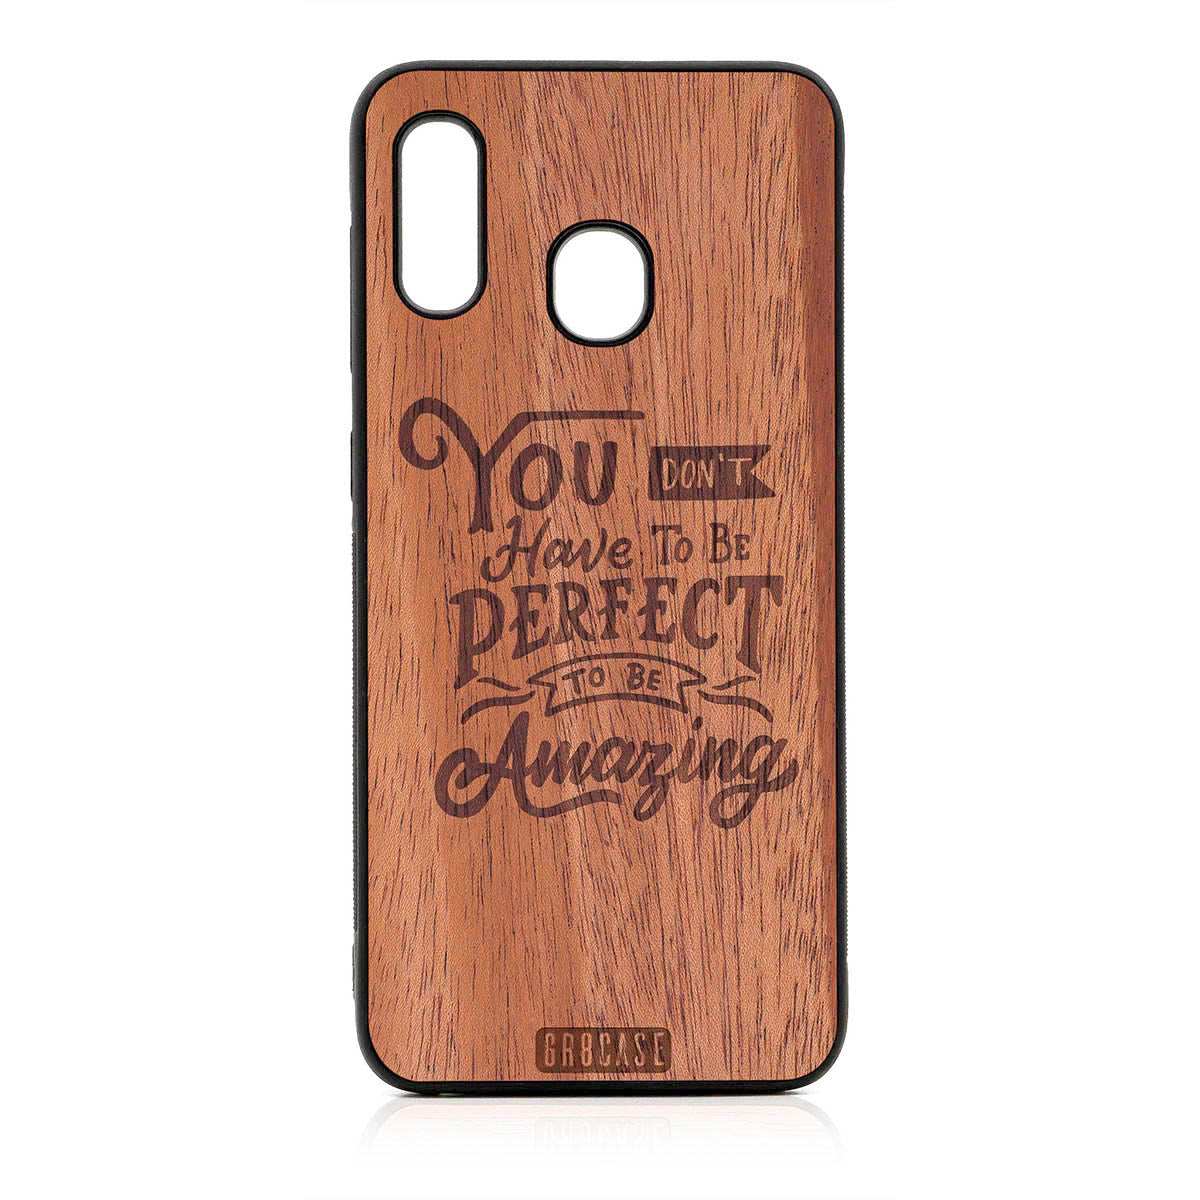 You Don't Have To Be Perfect To Be Amazing Design Wood Case For Samsung Galaxy A20